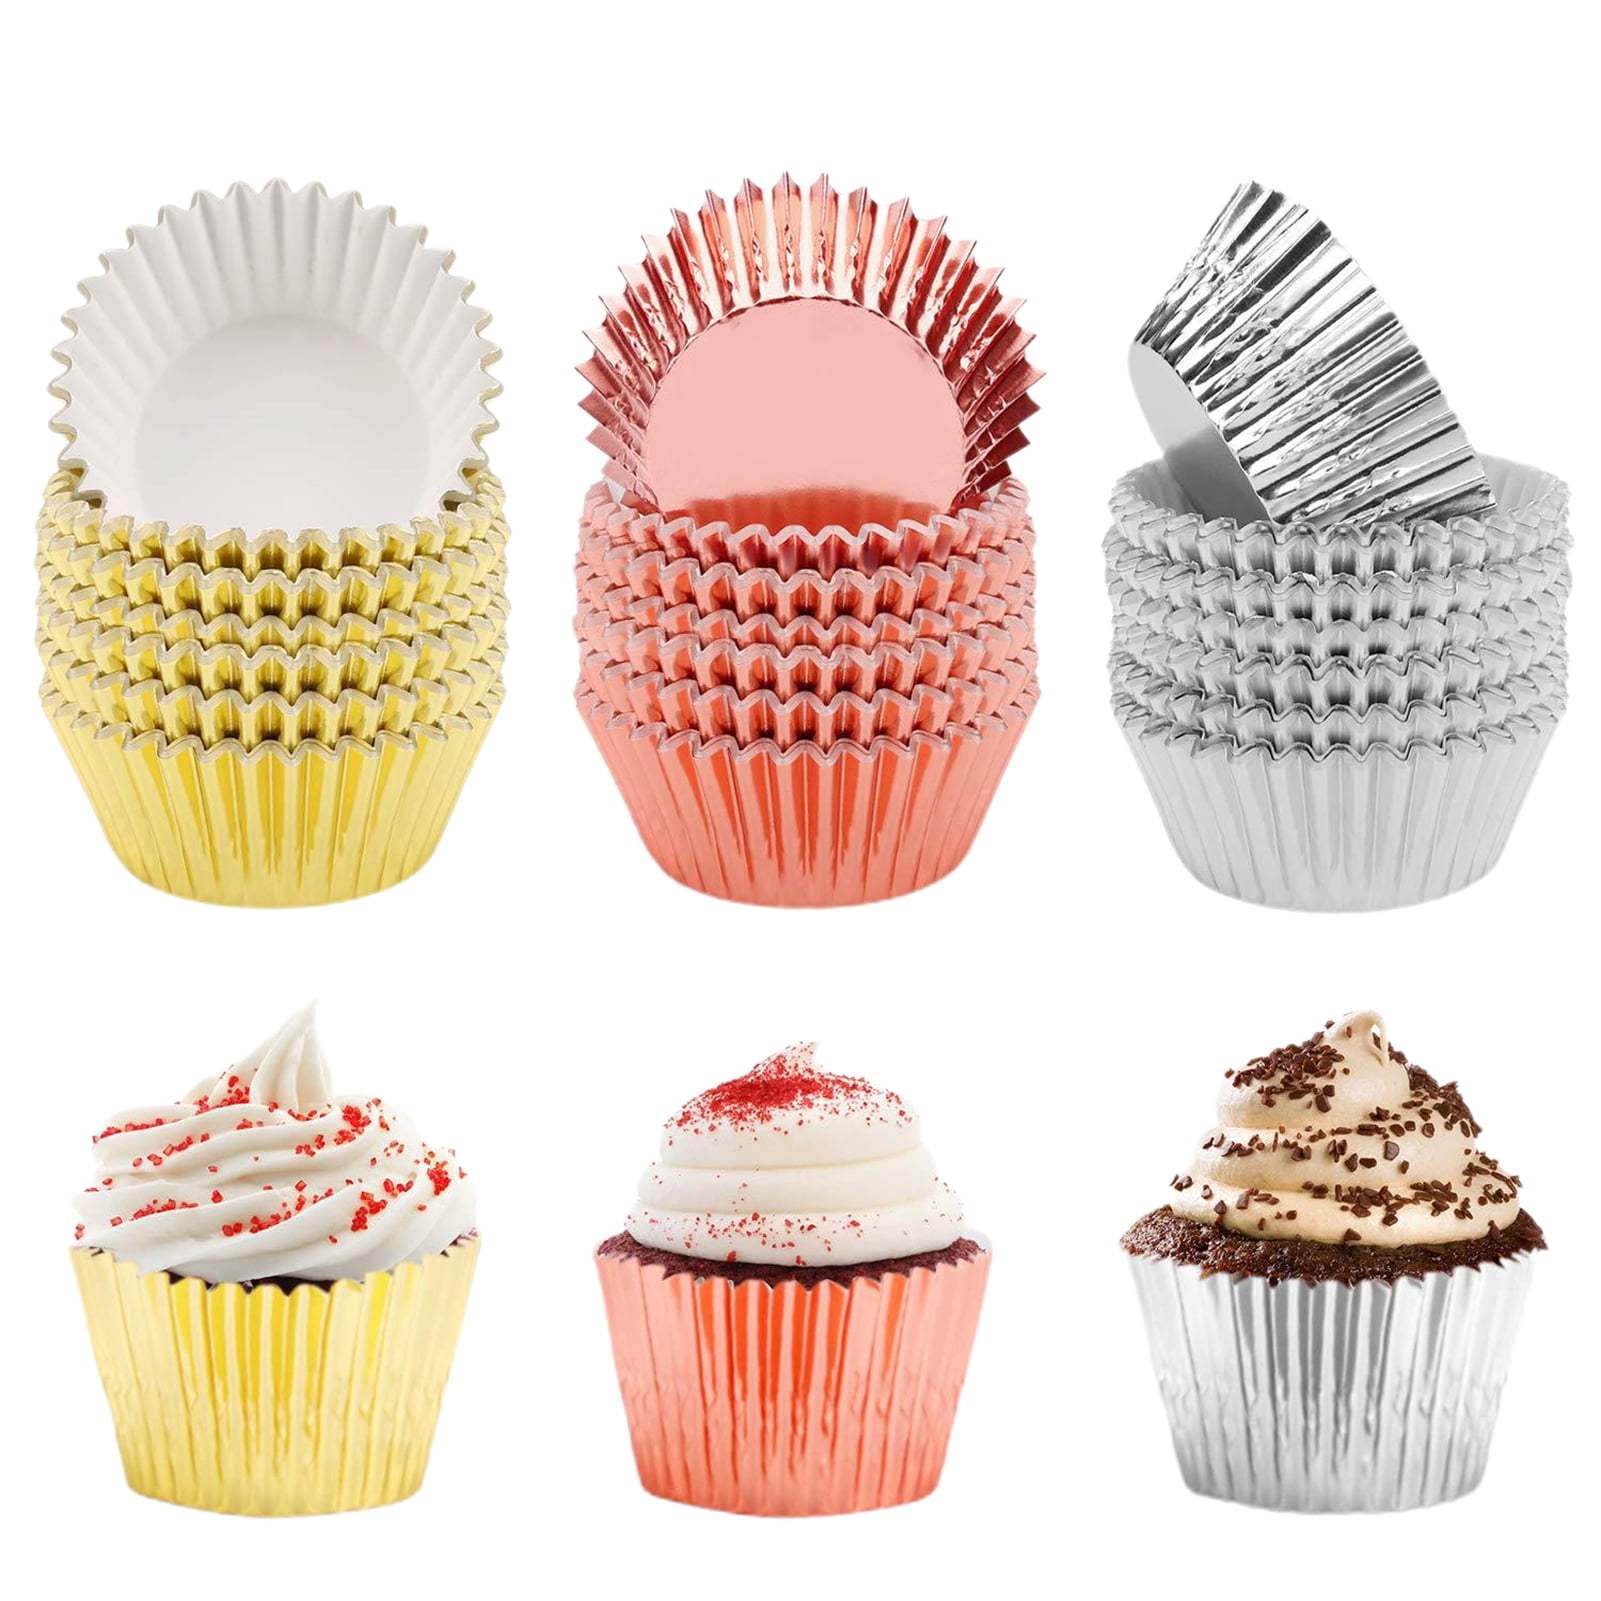 Fairnull 100Pcs Cake Cups Grease-Proof Heat Resistant Aluminum Foil Cupcake  Liners Wrappers Baking Supplies